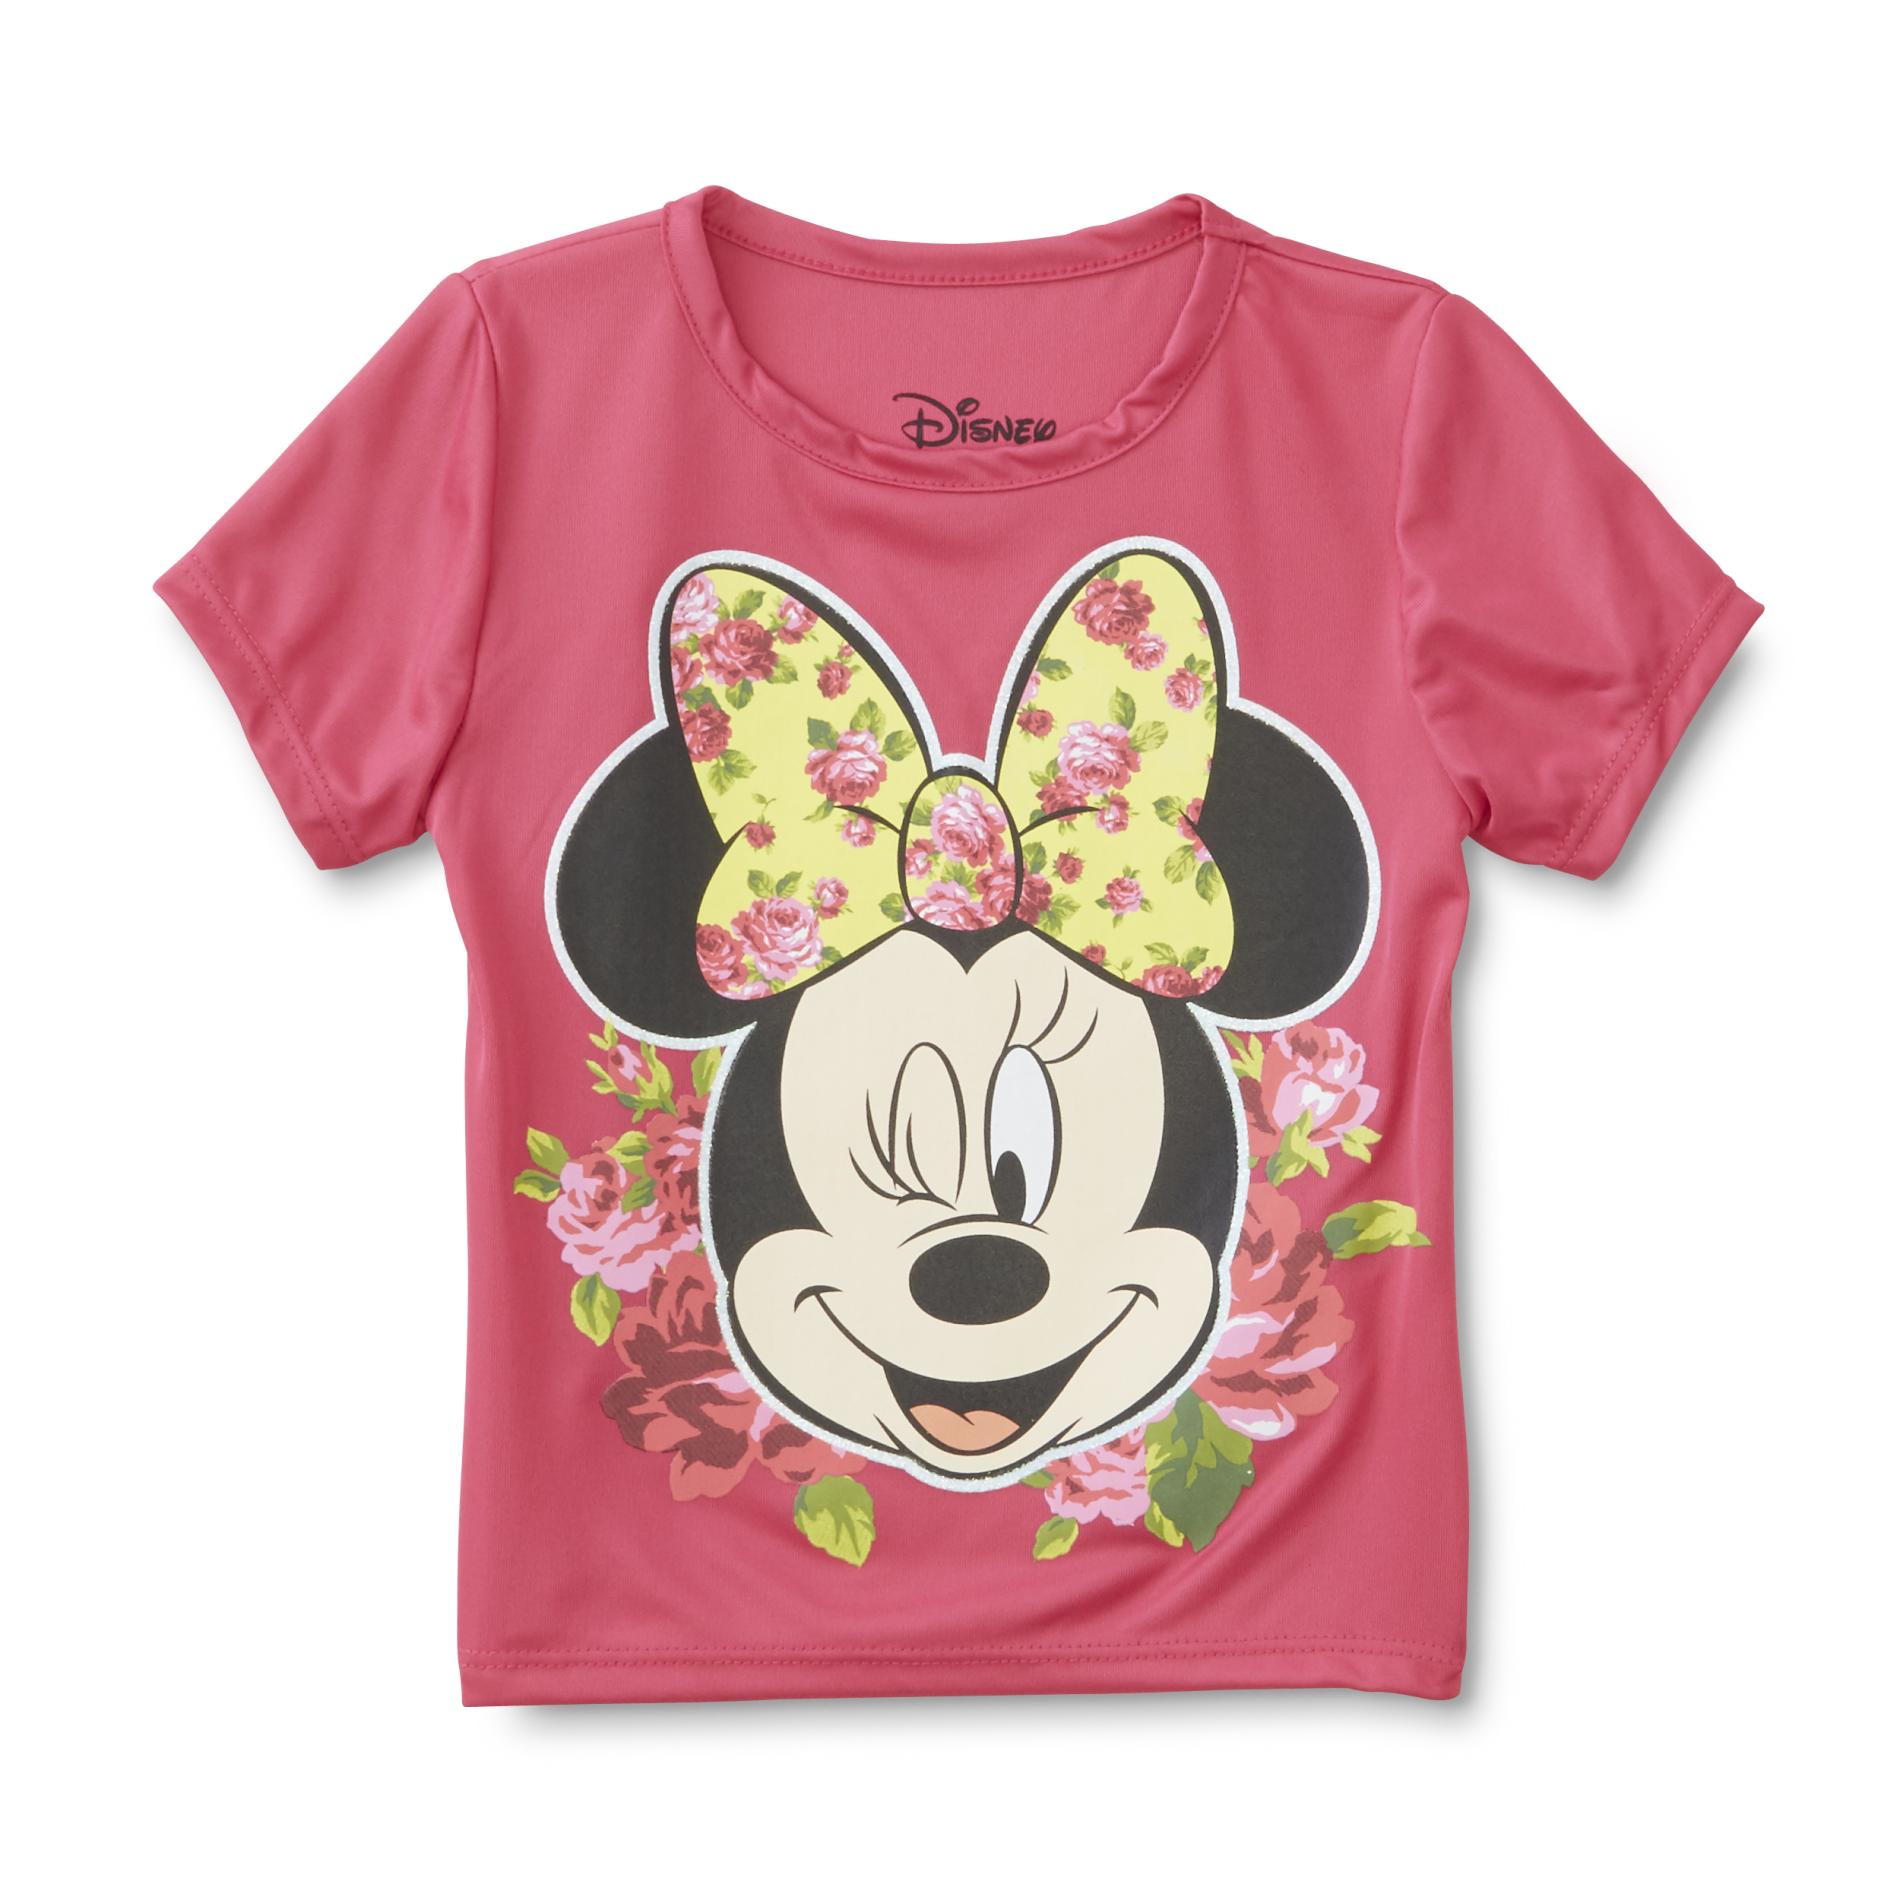 Disney Minnie Mouse Toddler Girl's T-Shirt - Floral